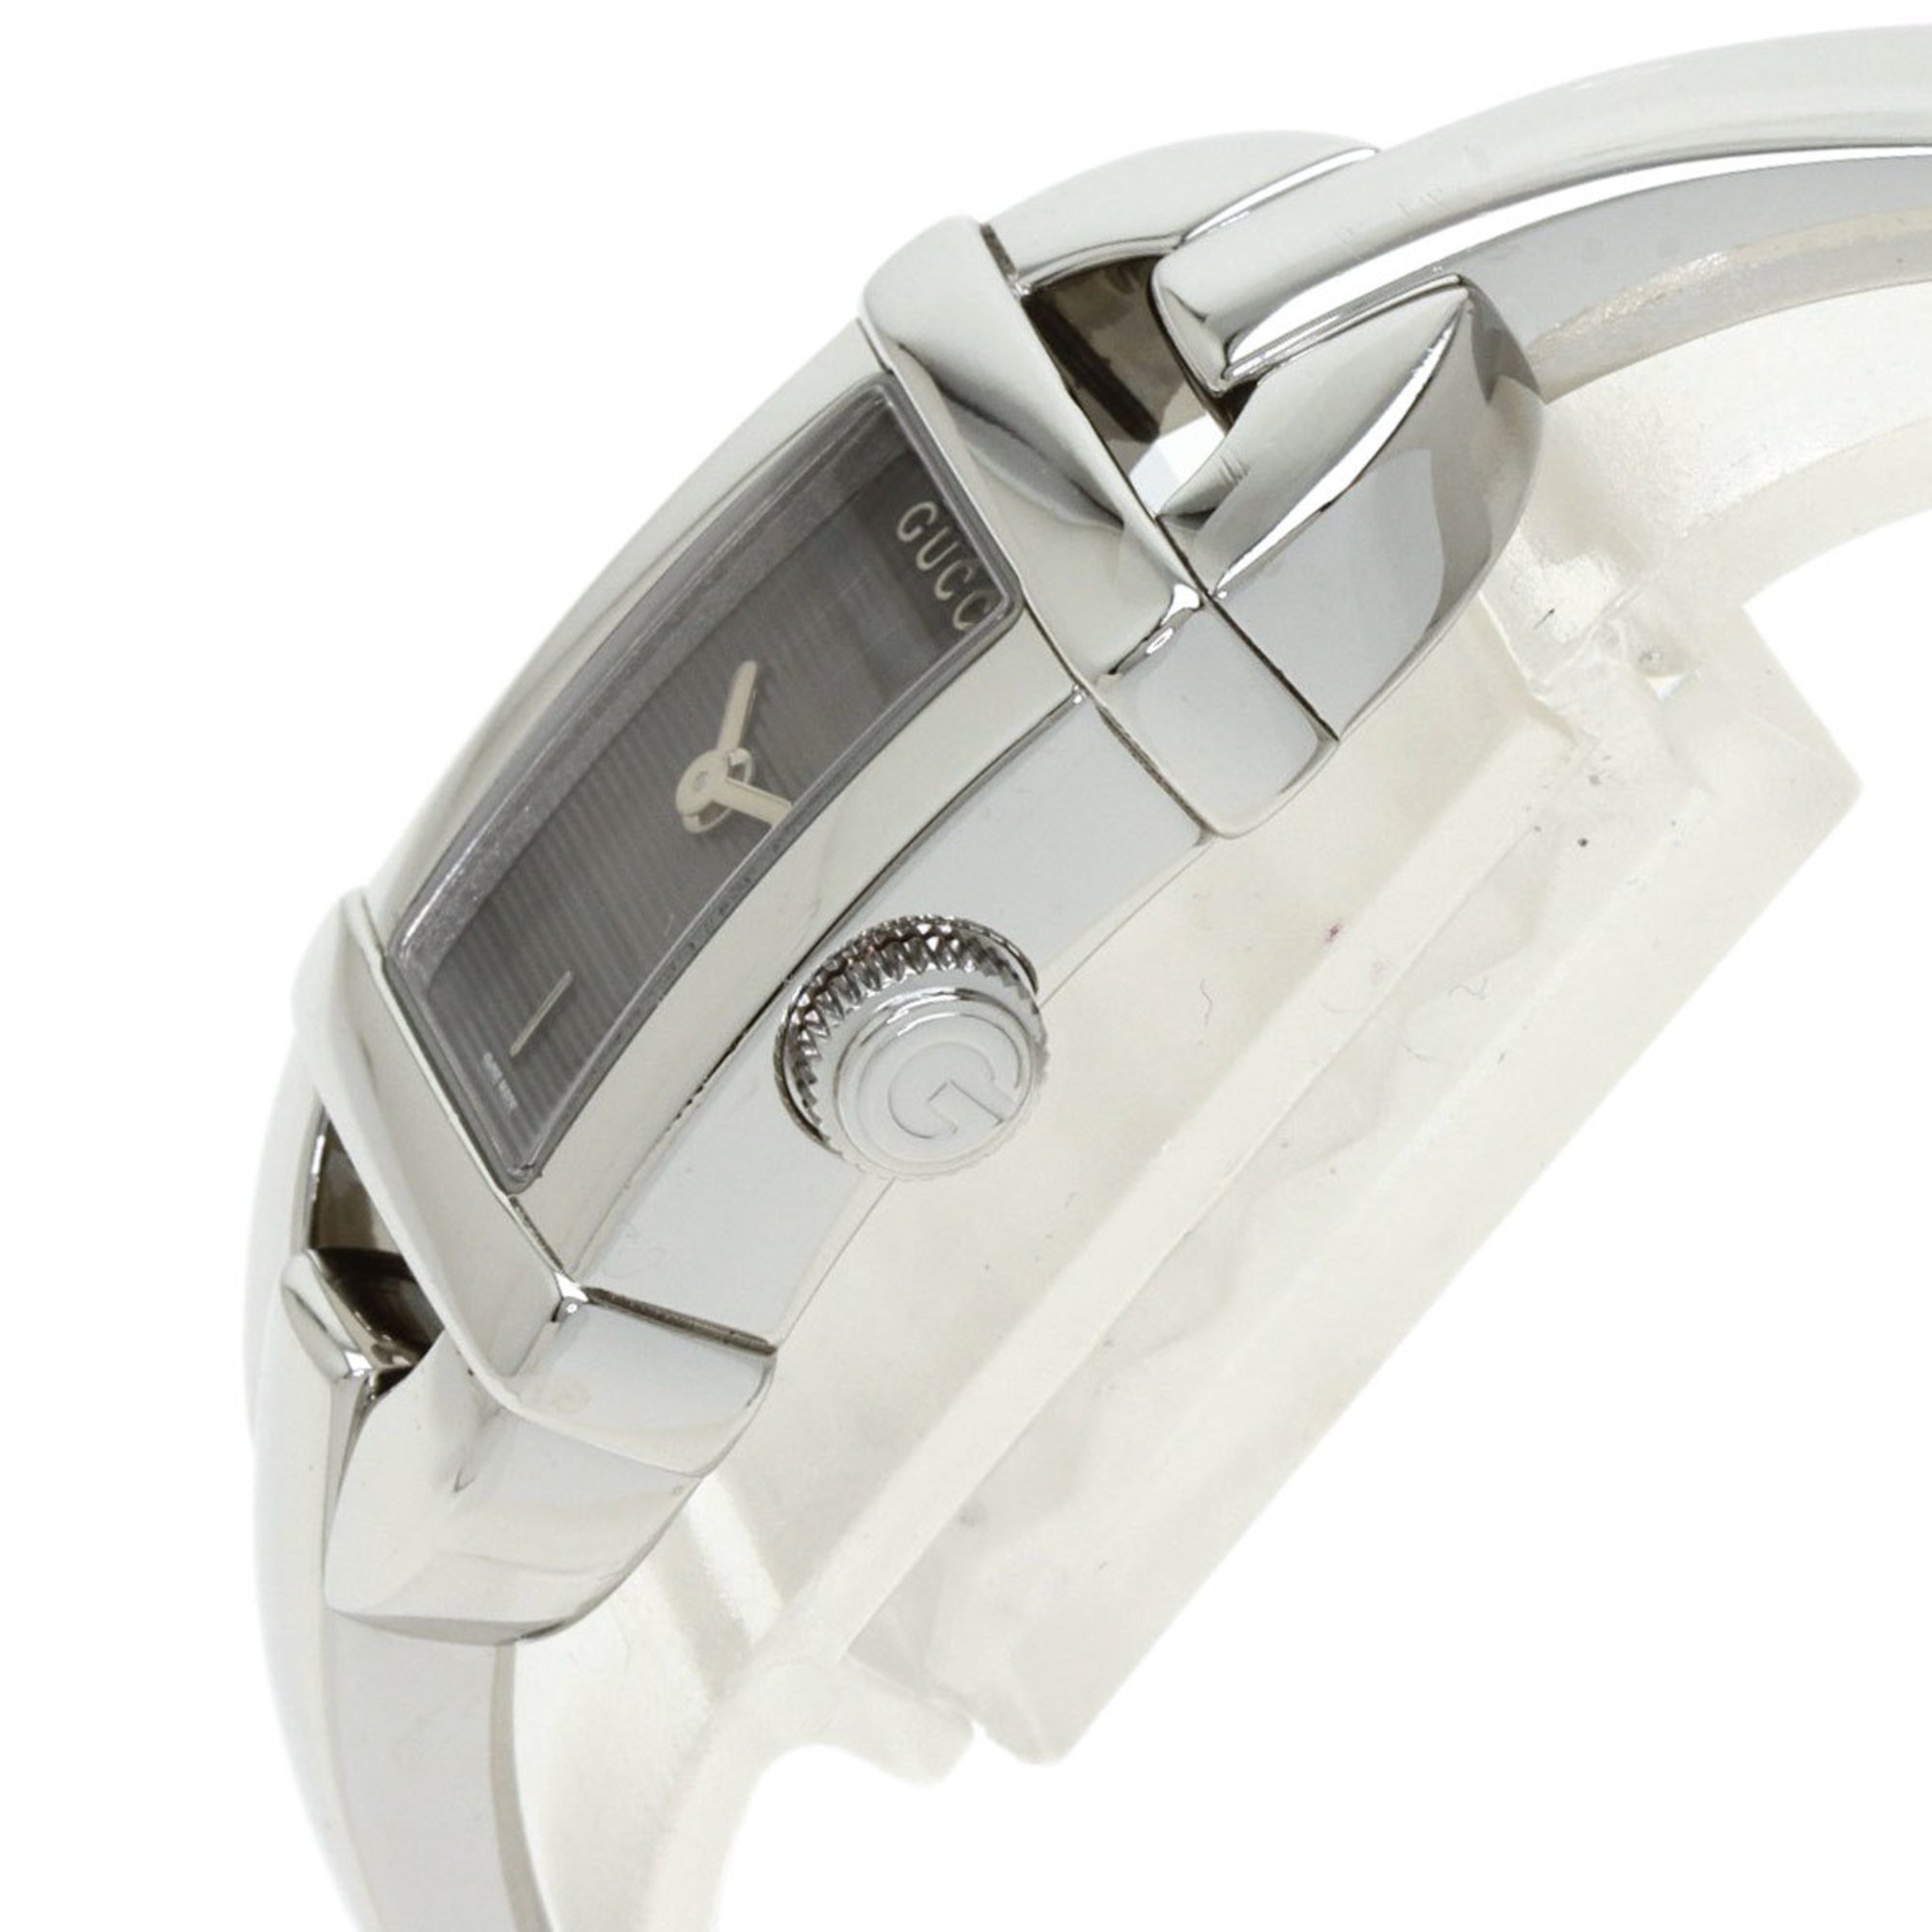 Gucci 6800L Bangle Watch Stainless Steel SS Ladies GUCCI